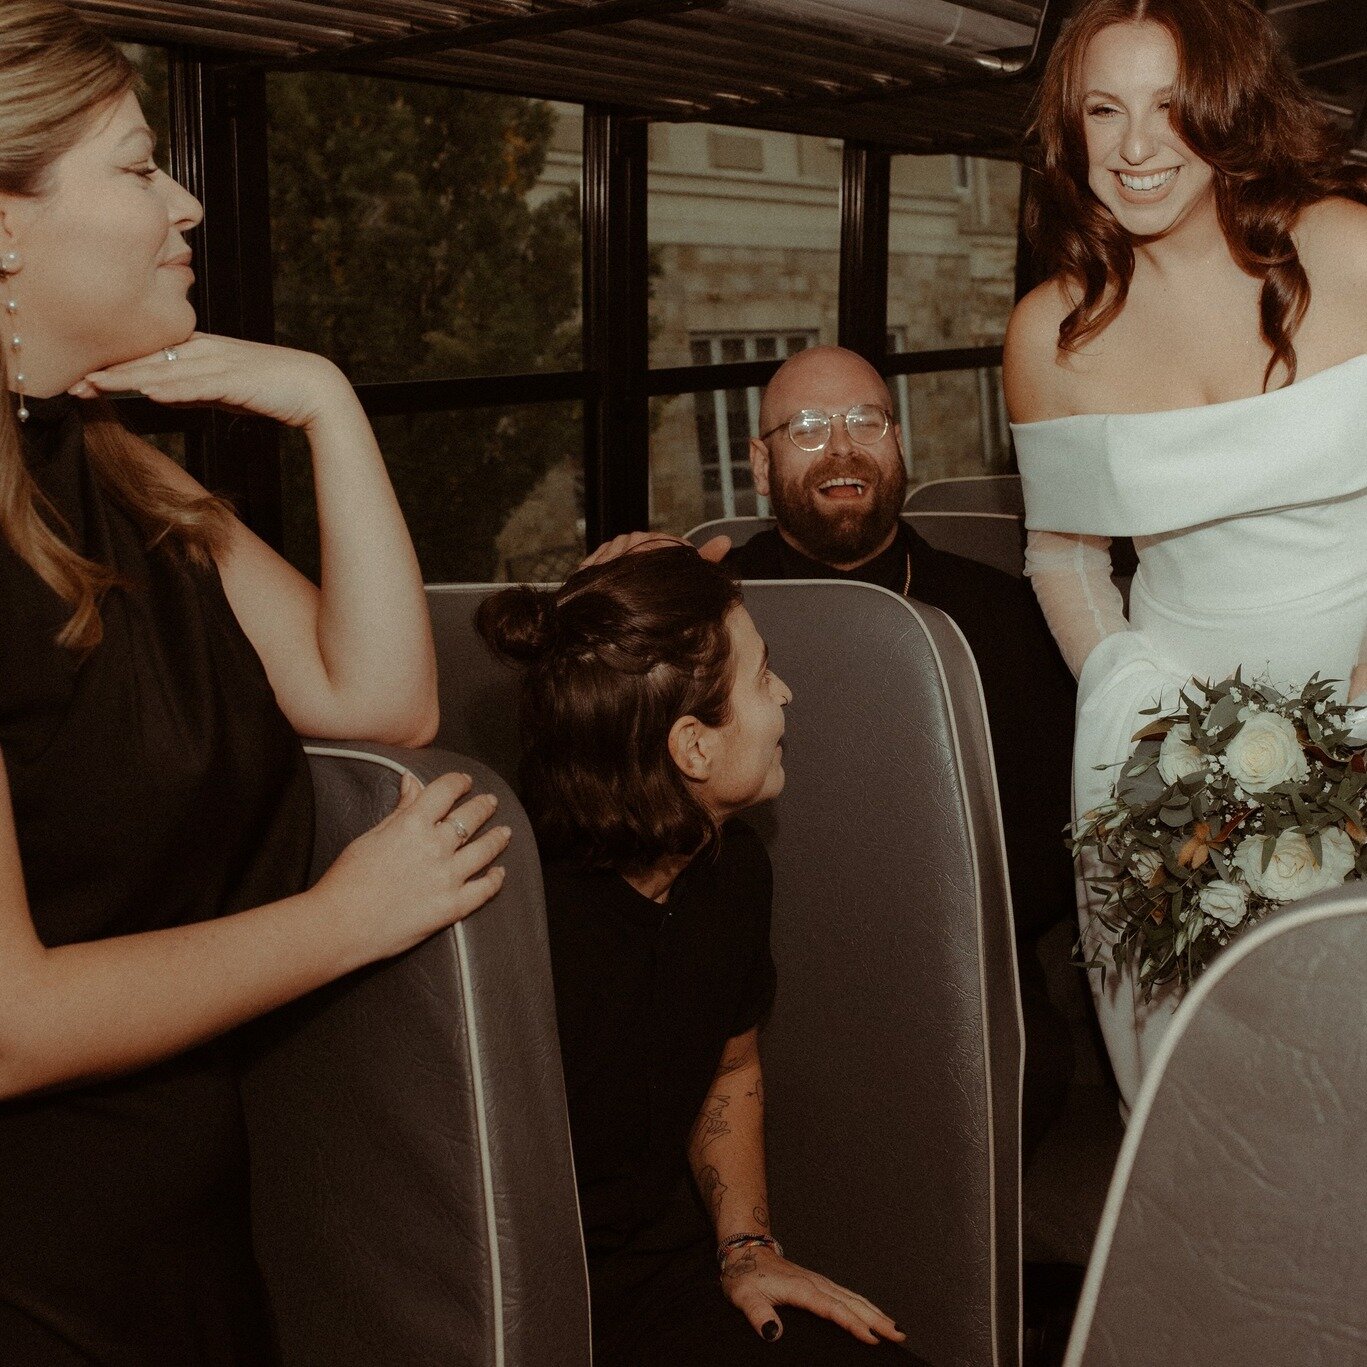 When the crew leave in a bus! Love this! 
.
.
.
#modernbride #busbride #buswedding #funwedding #montrealphotographer